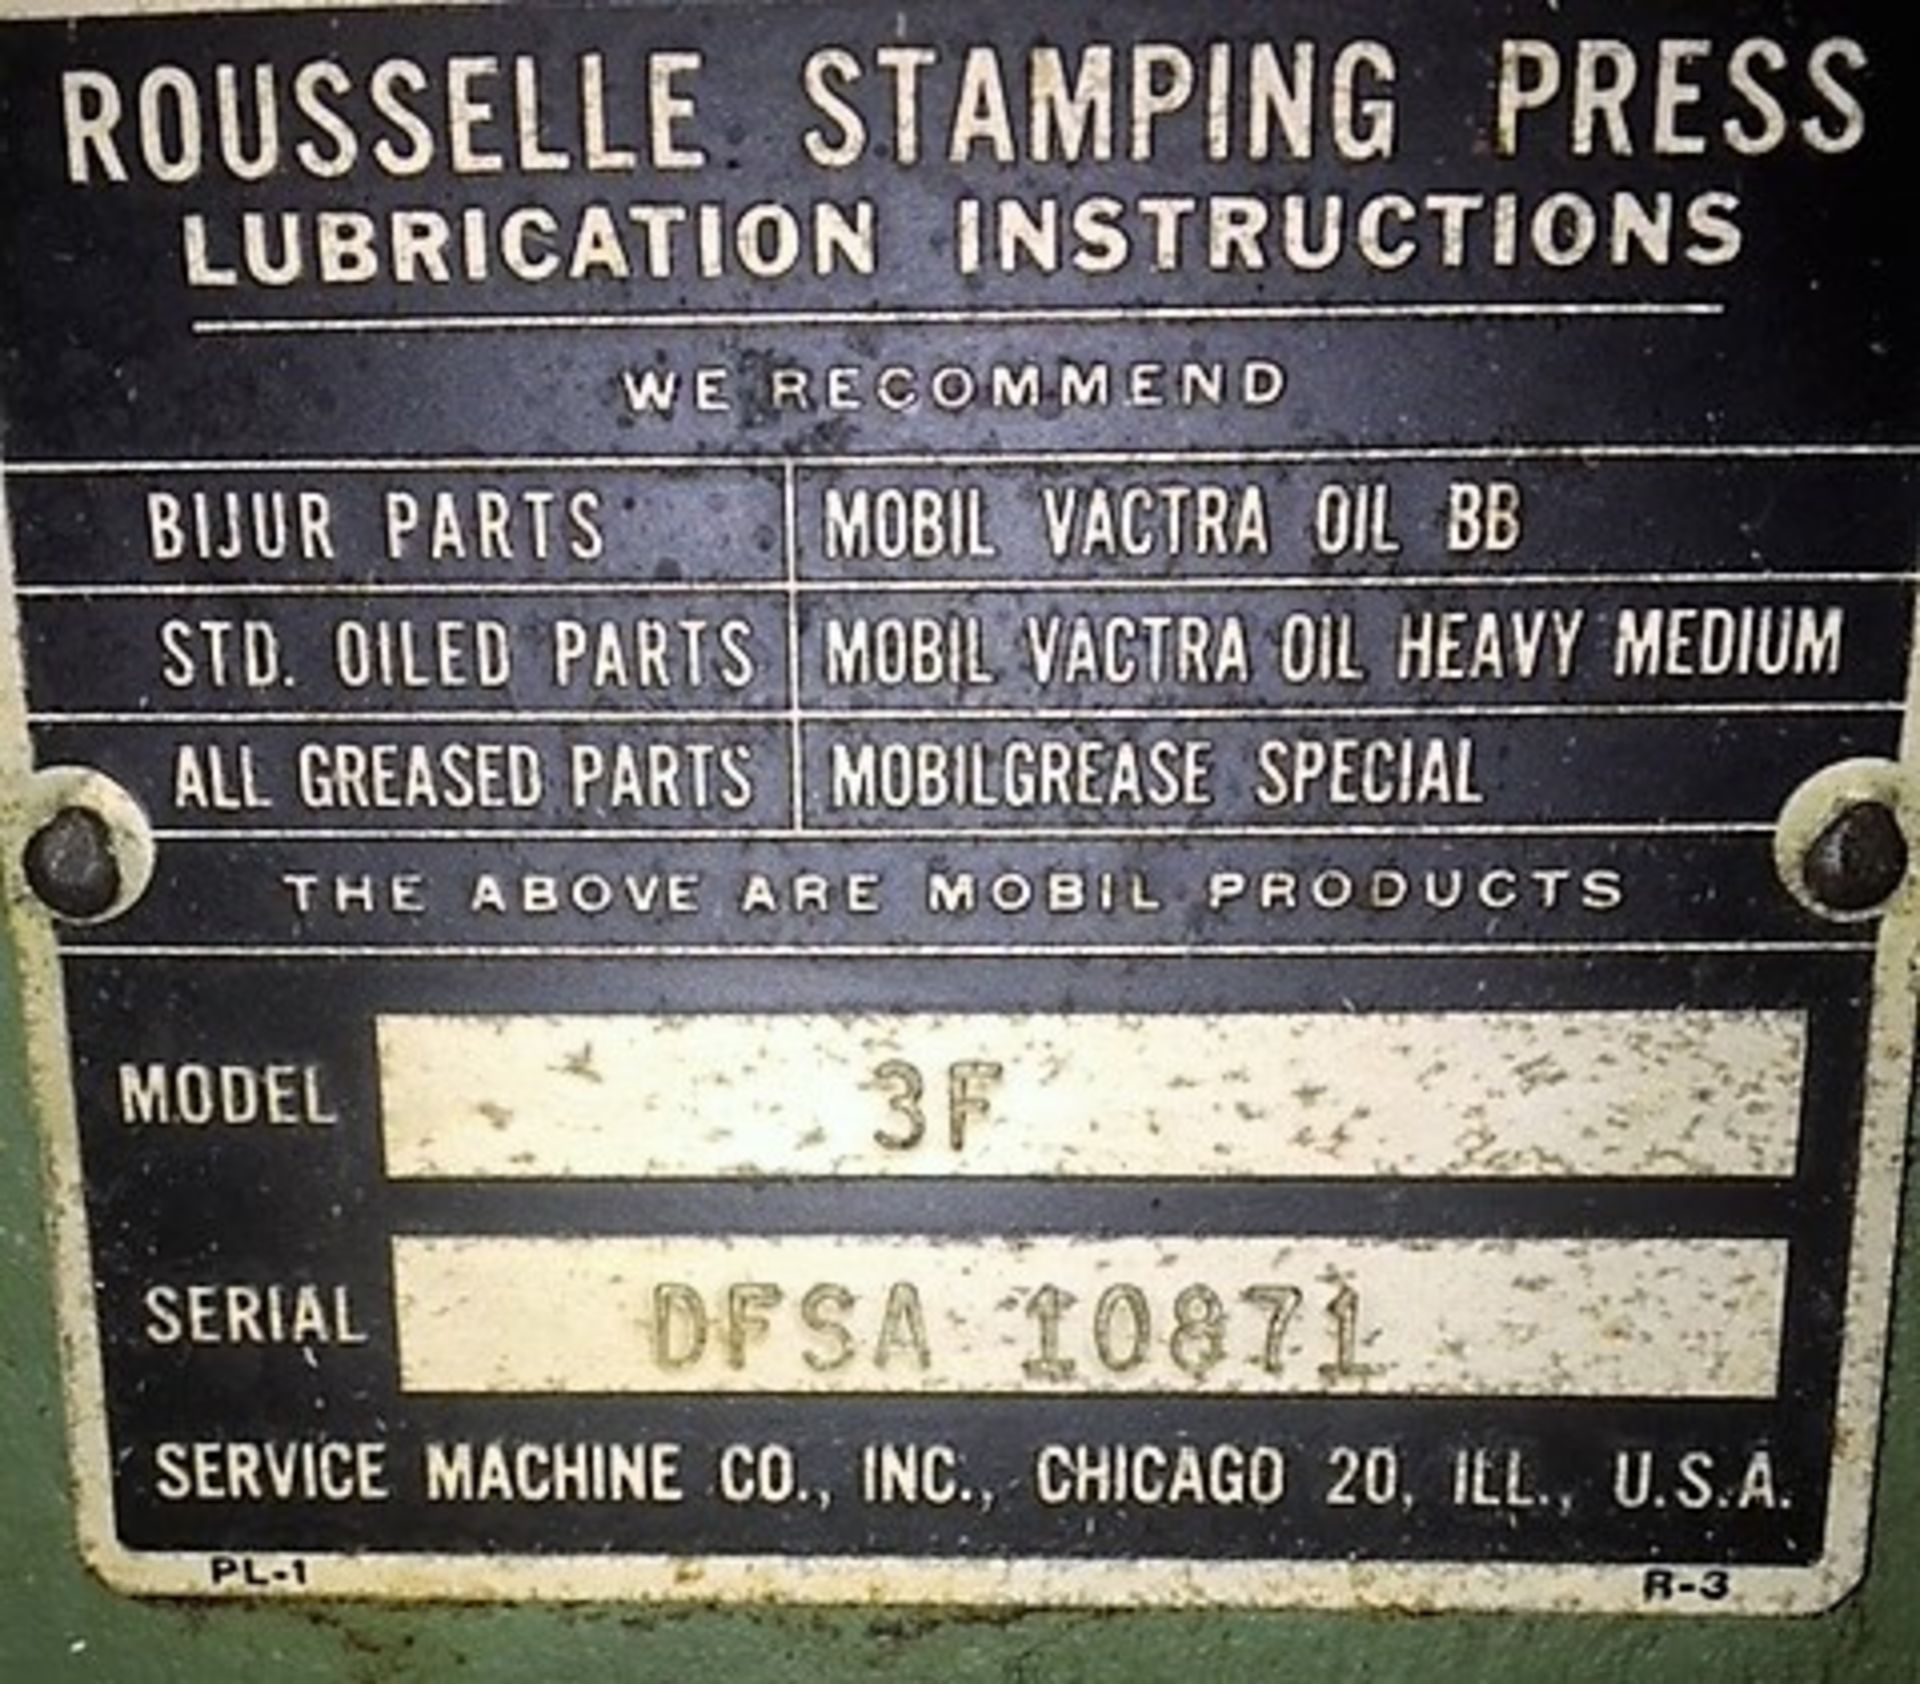 Rousselle Mdl. 3F 25-Ton Capacity OBI Press, S/N: DFSA-10871 (Located in Ronkonkoma, NY) - Image 4 of 4